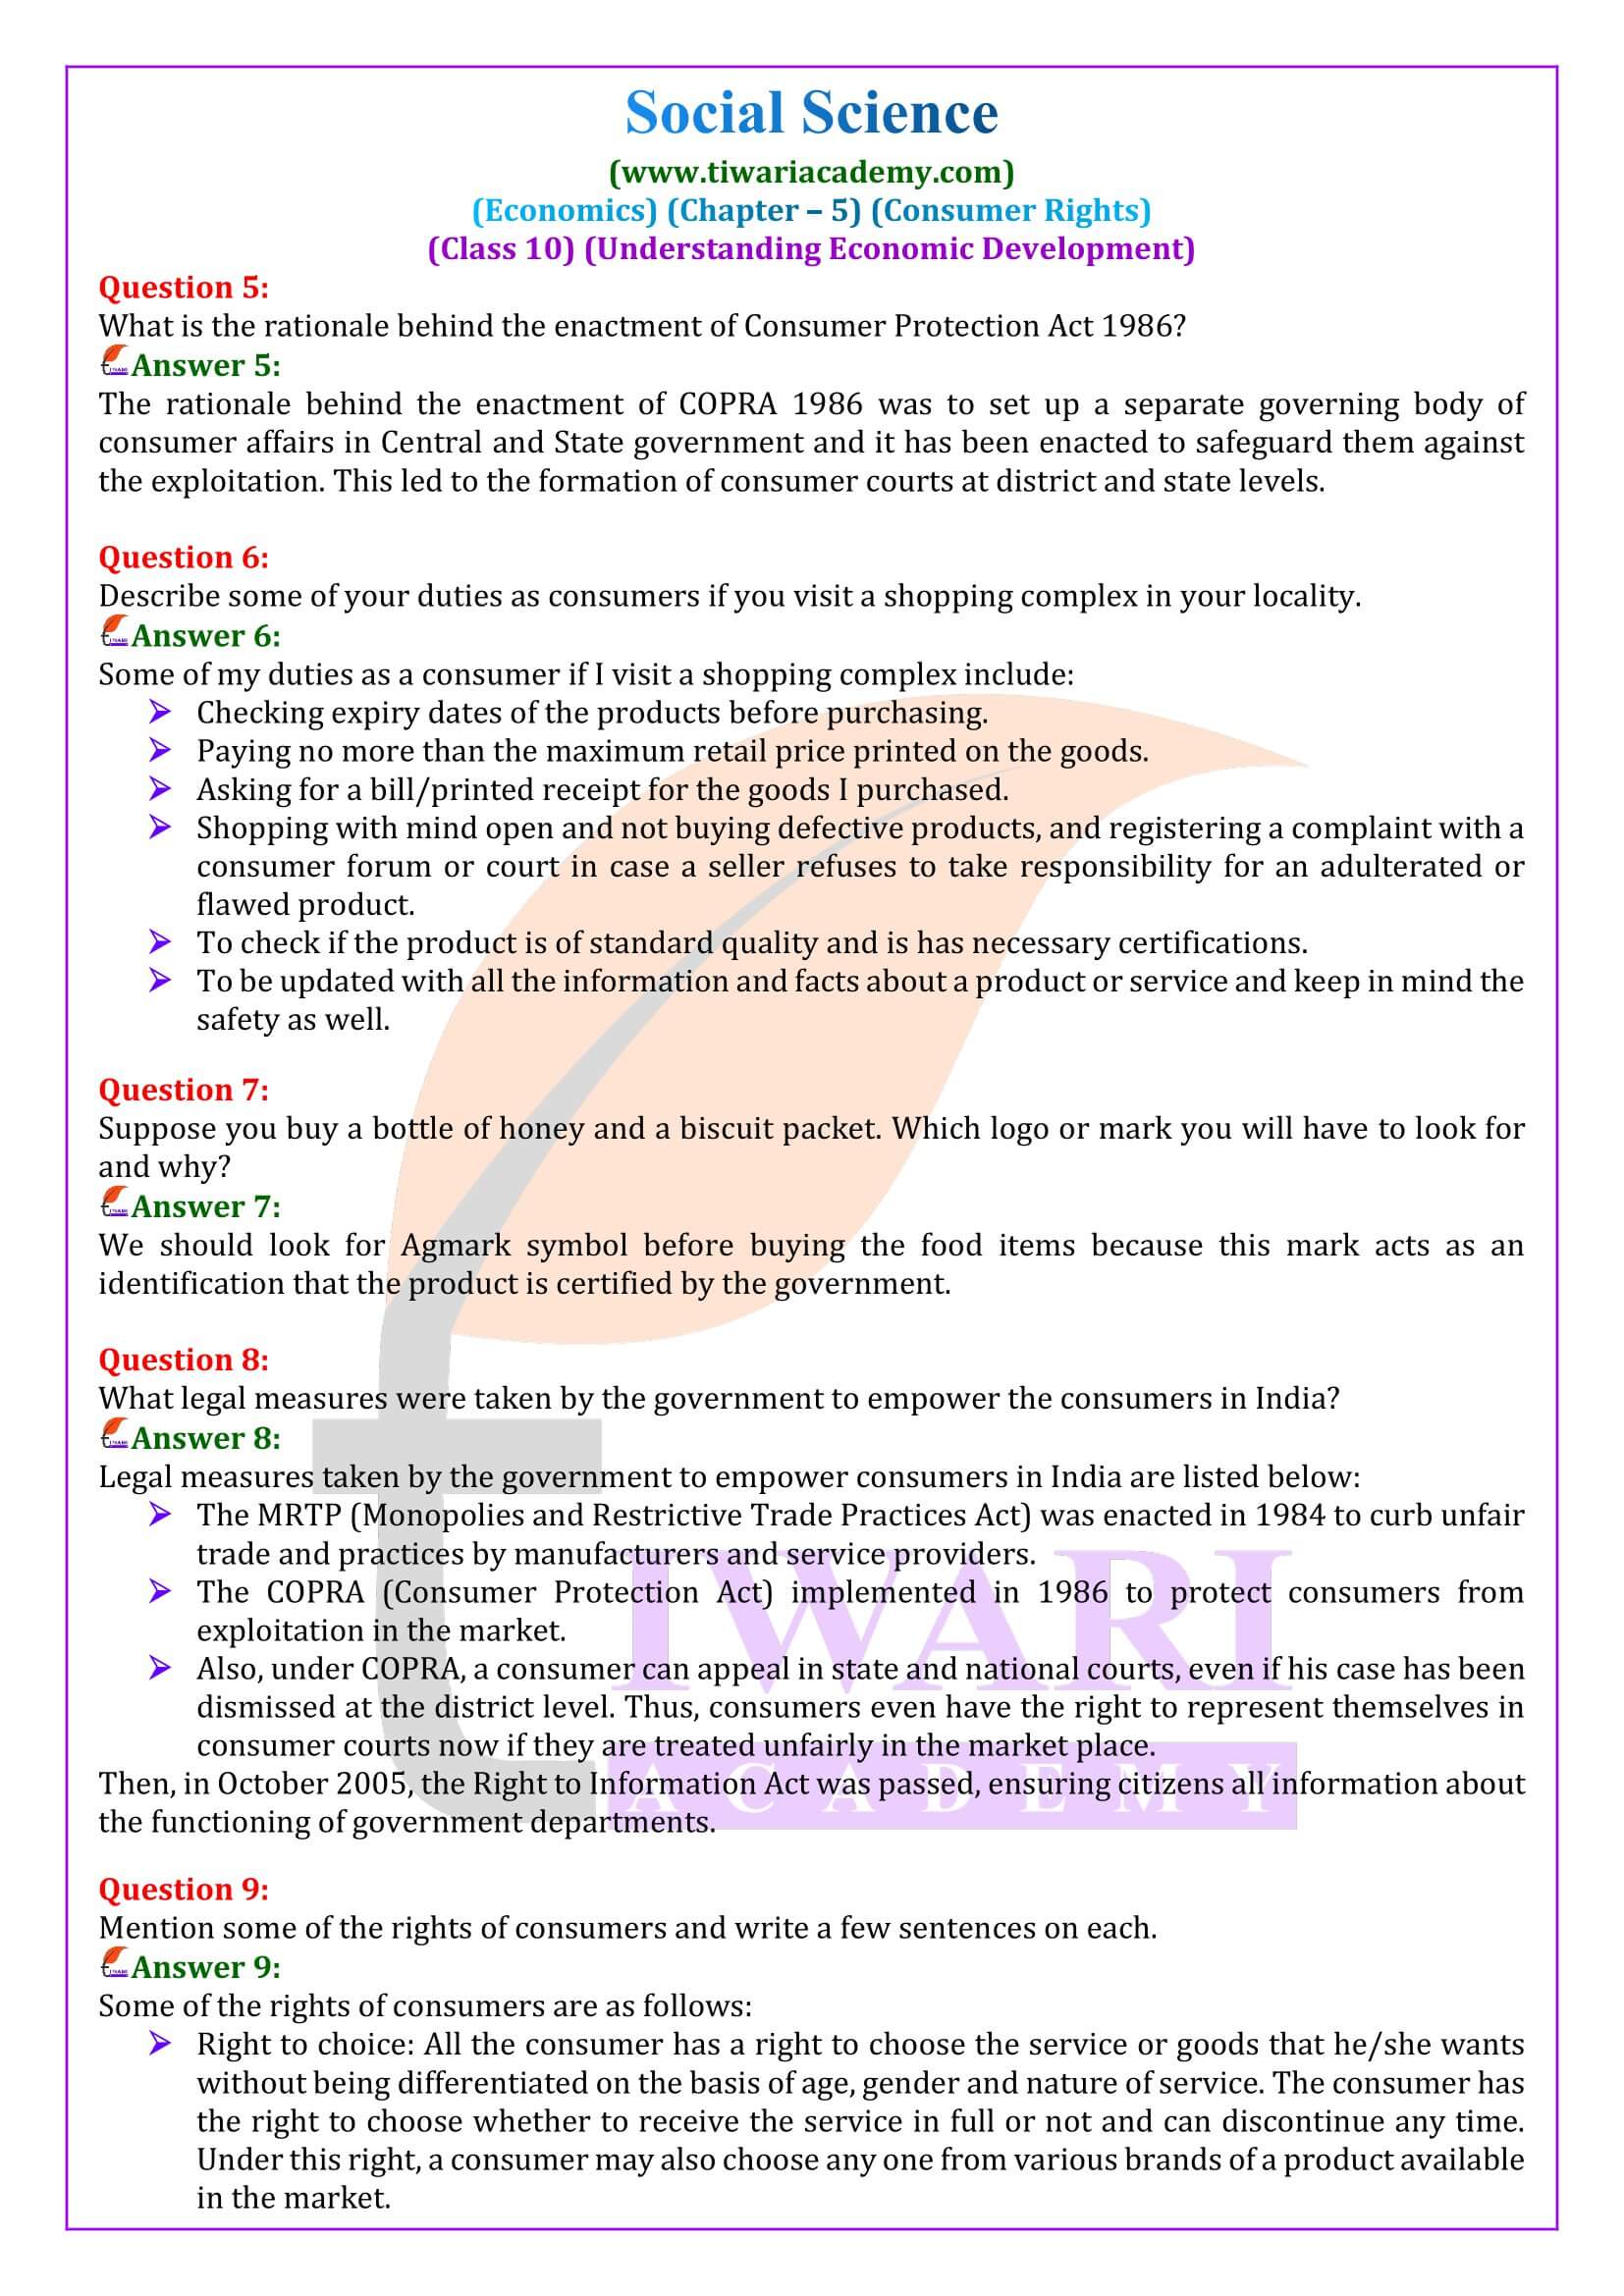 NCERT Solutions for Class 10 Economics Chapter 5 in English Medium